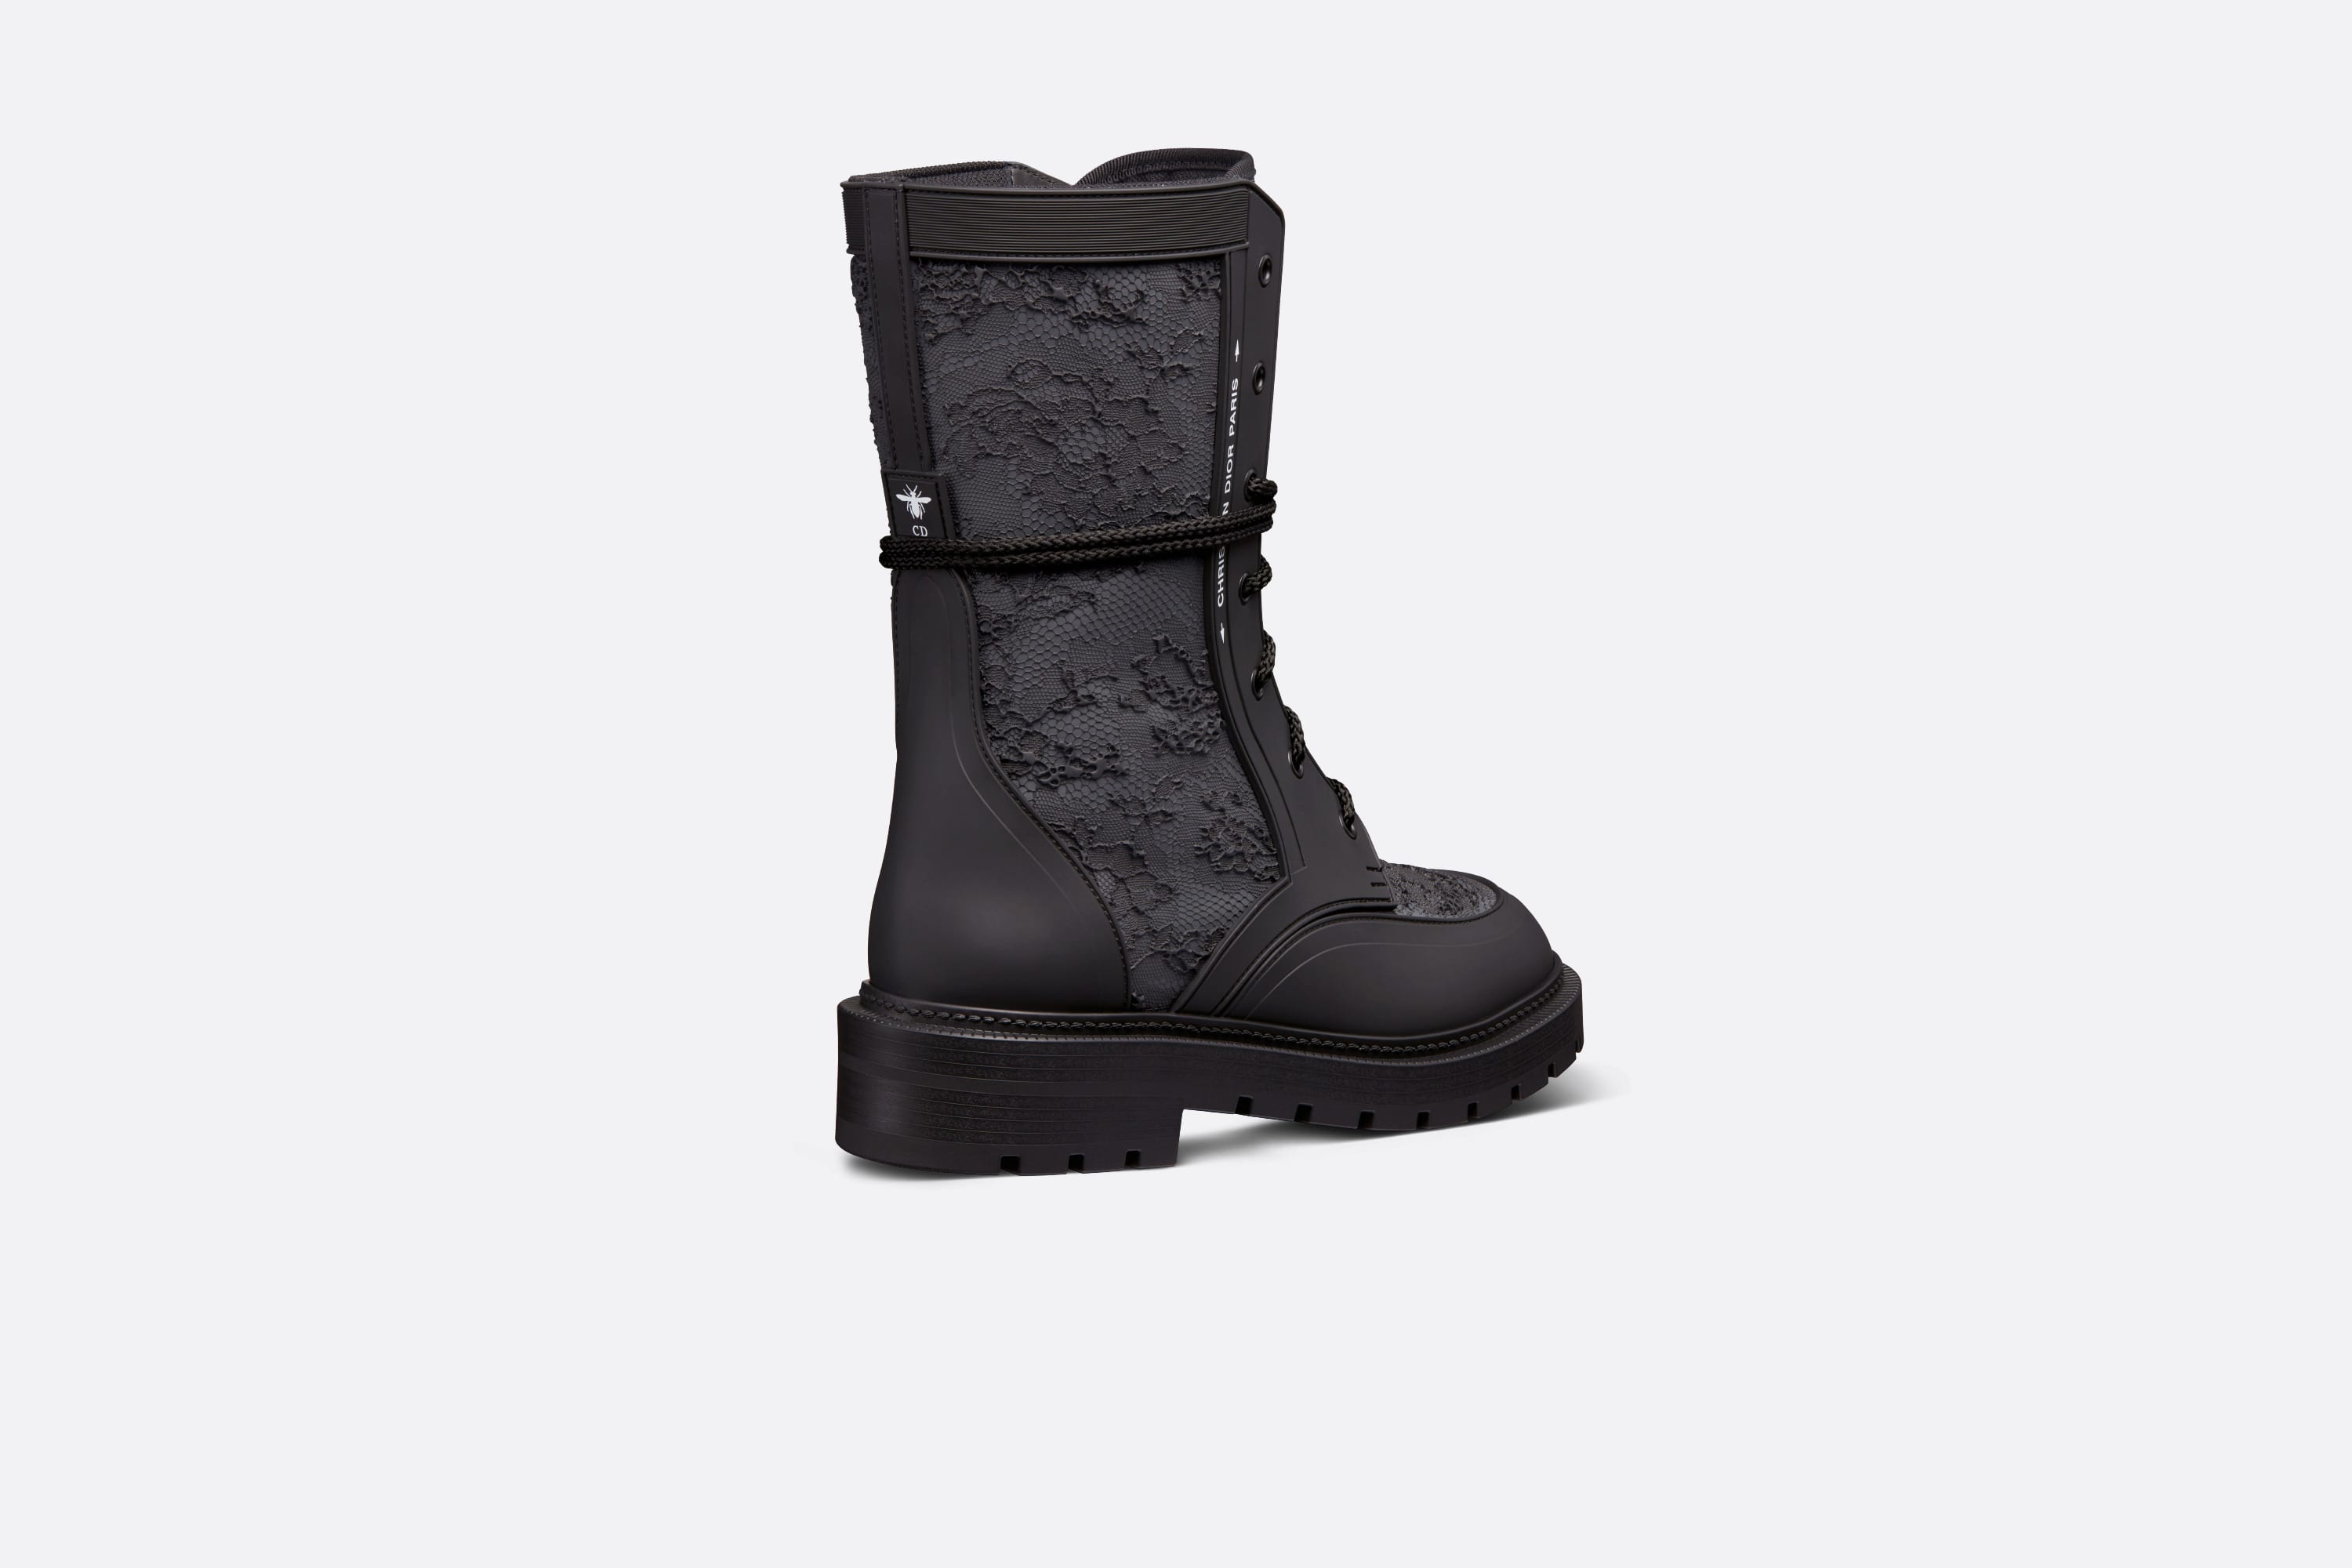 Urban-D Ankle Boot - 3